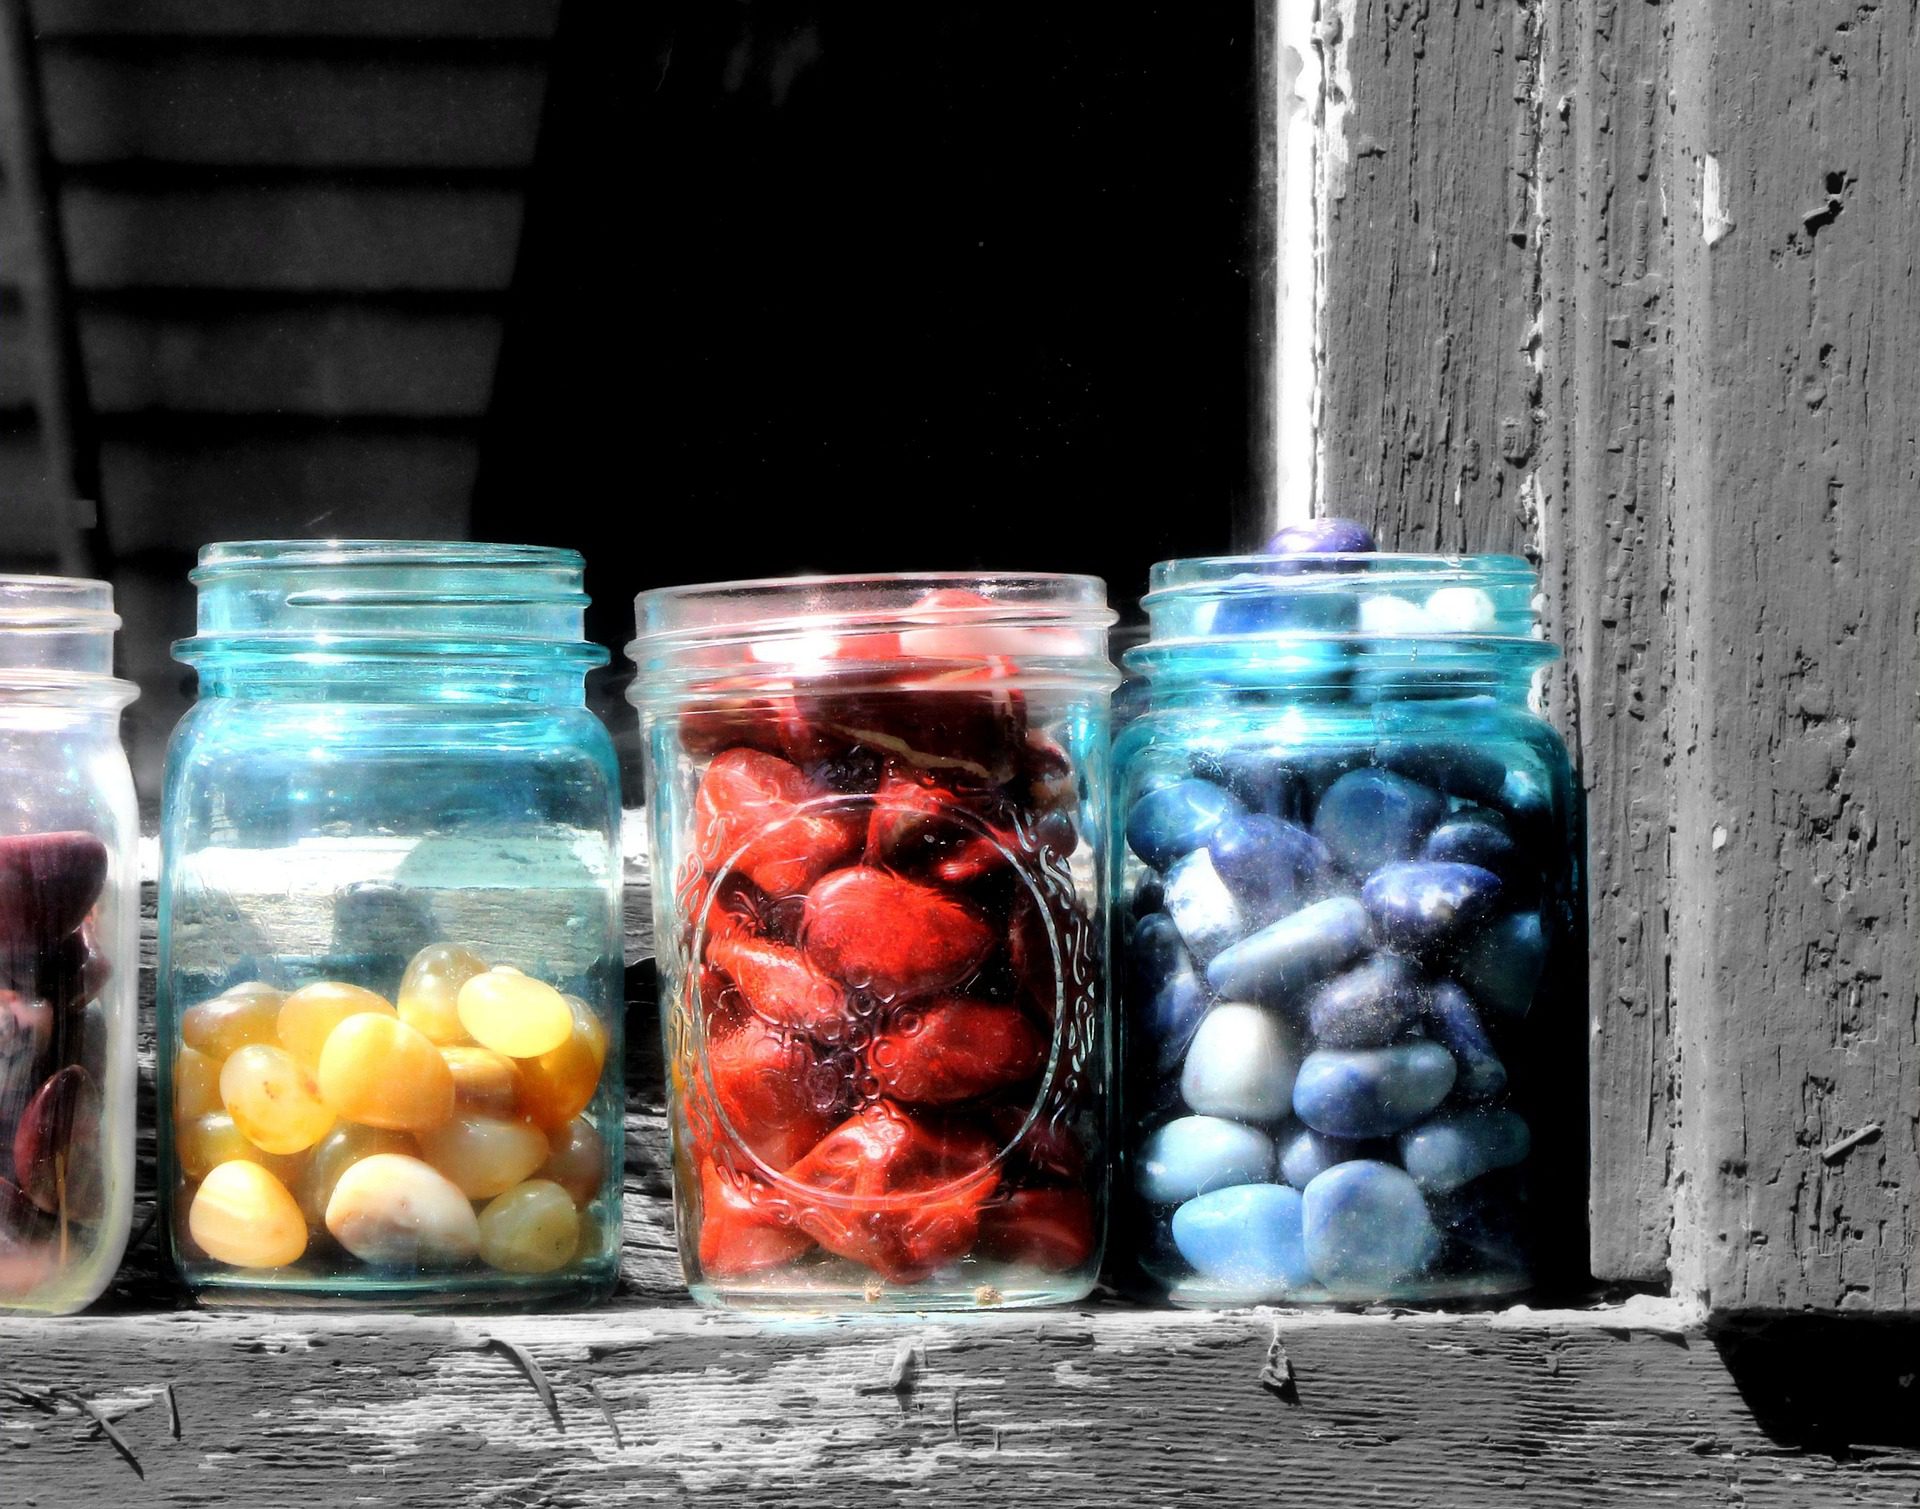 Clear jars of yello, red and blue rocks